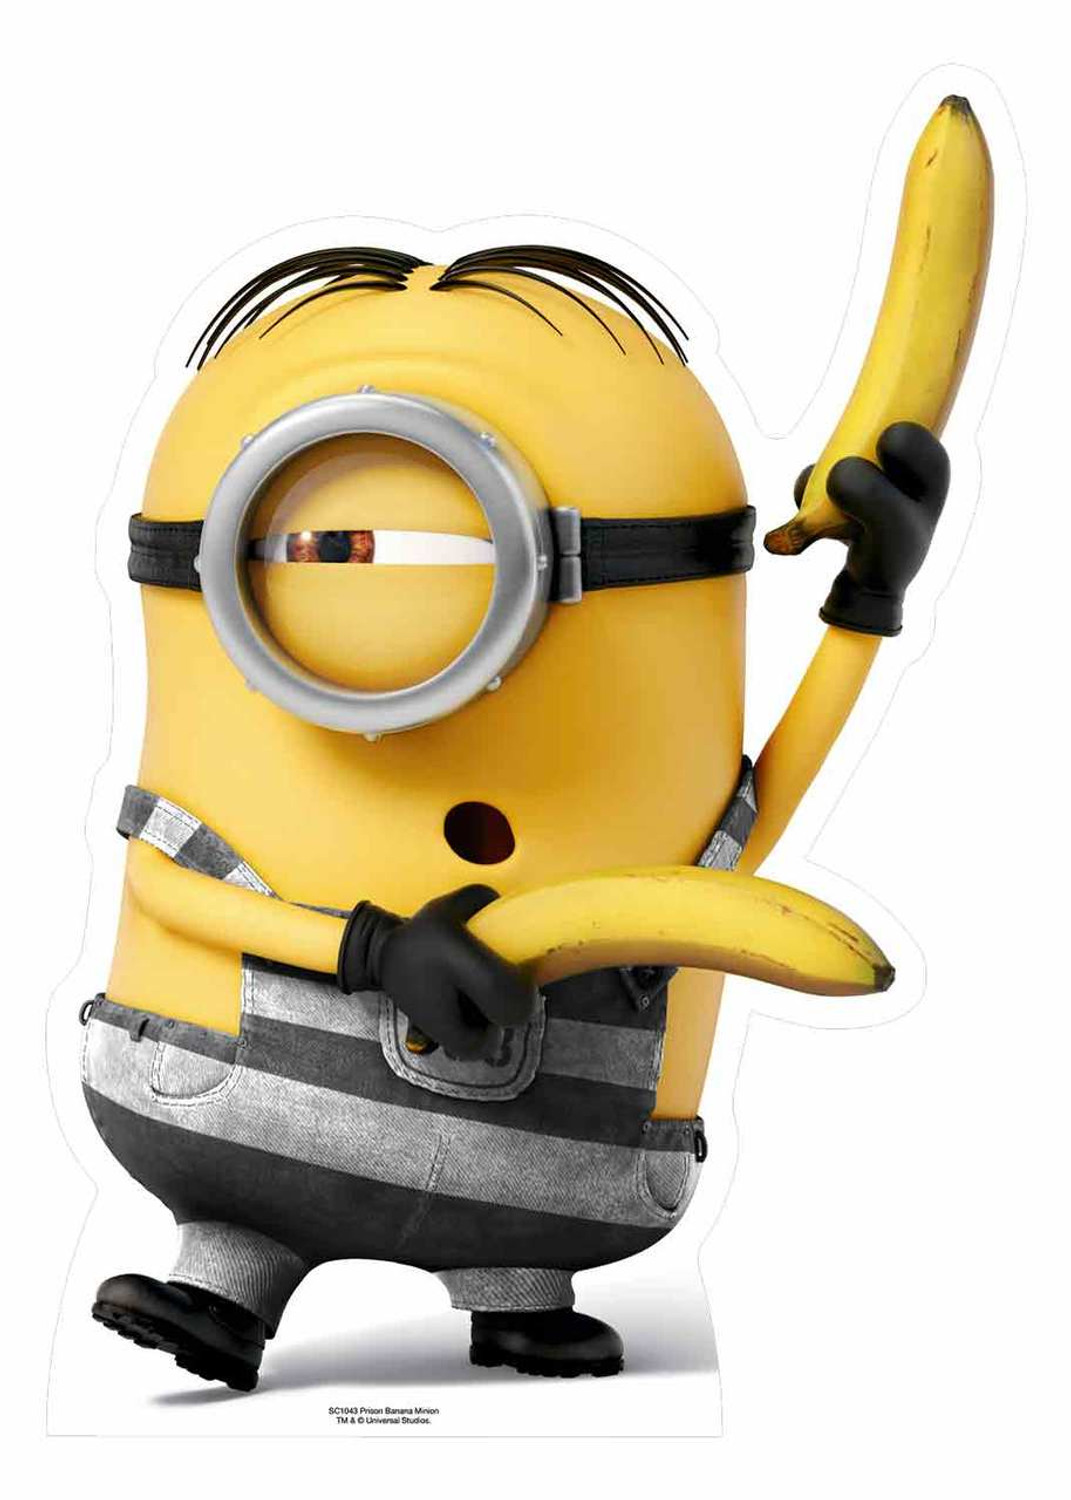 Have your logo behind minions singing the banana song by